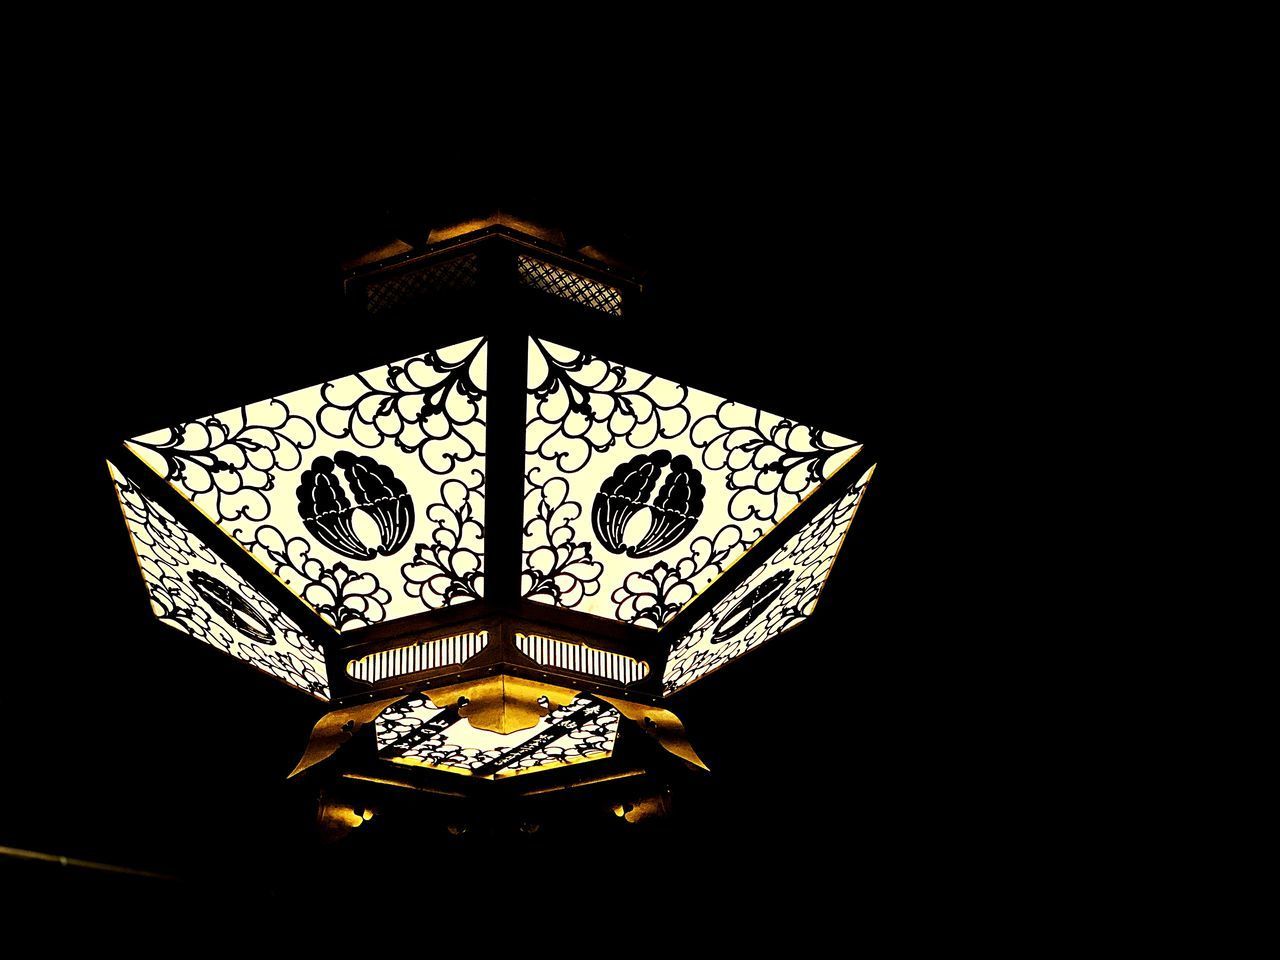 LOW ANGLE VIEW OF ILLUMINATED ELECTRIC LAMP AGAINST BLACK BACKGROUND